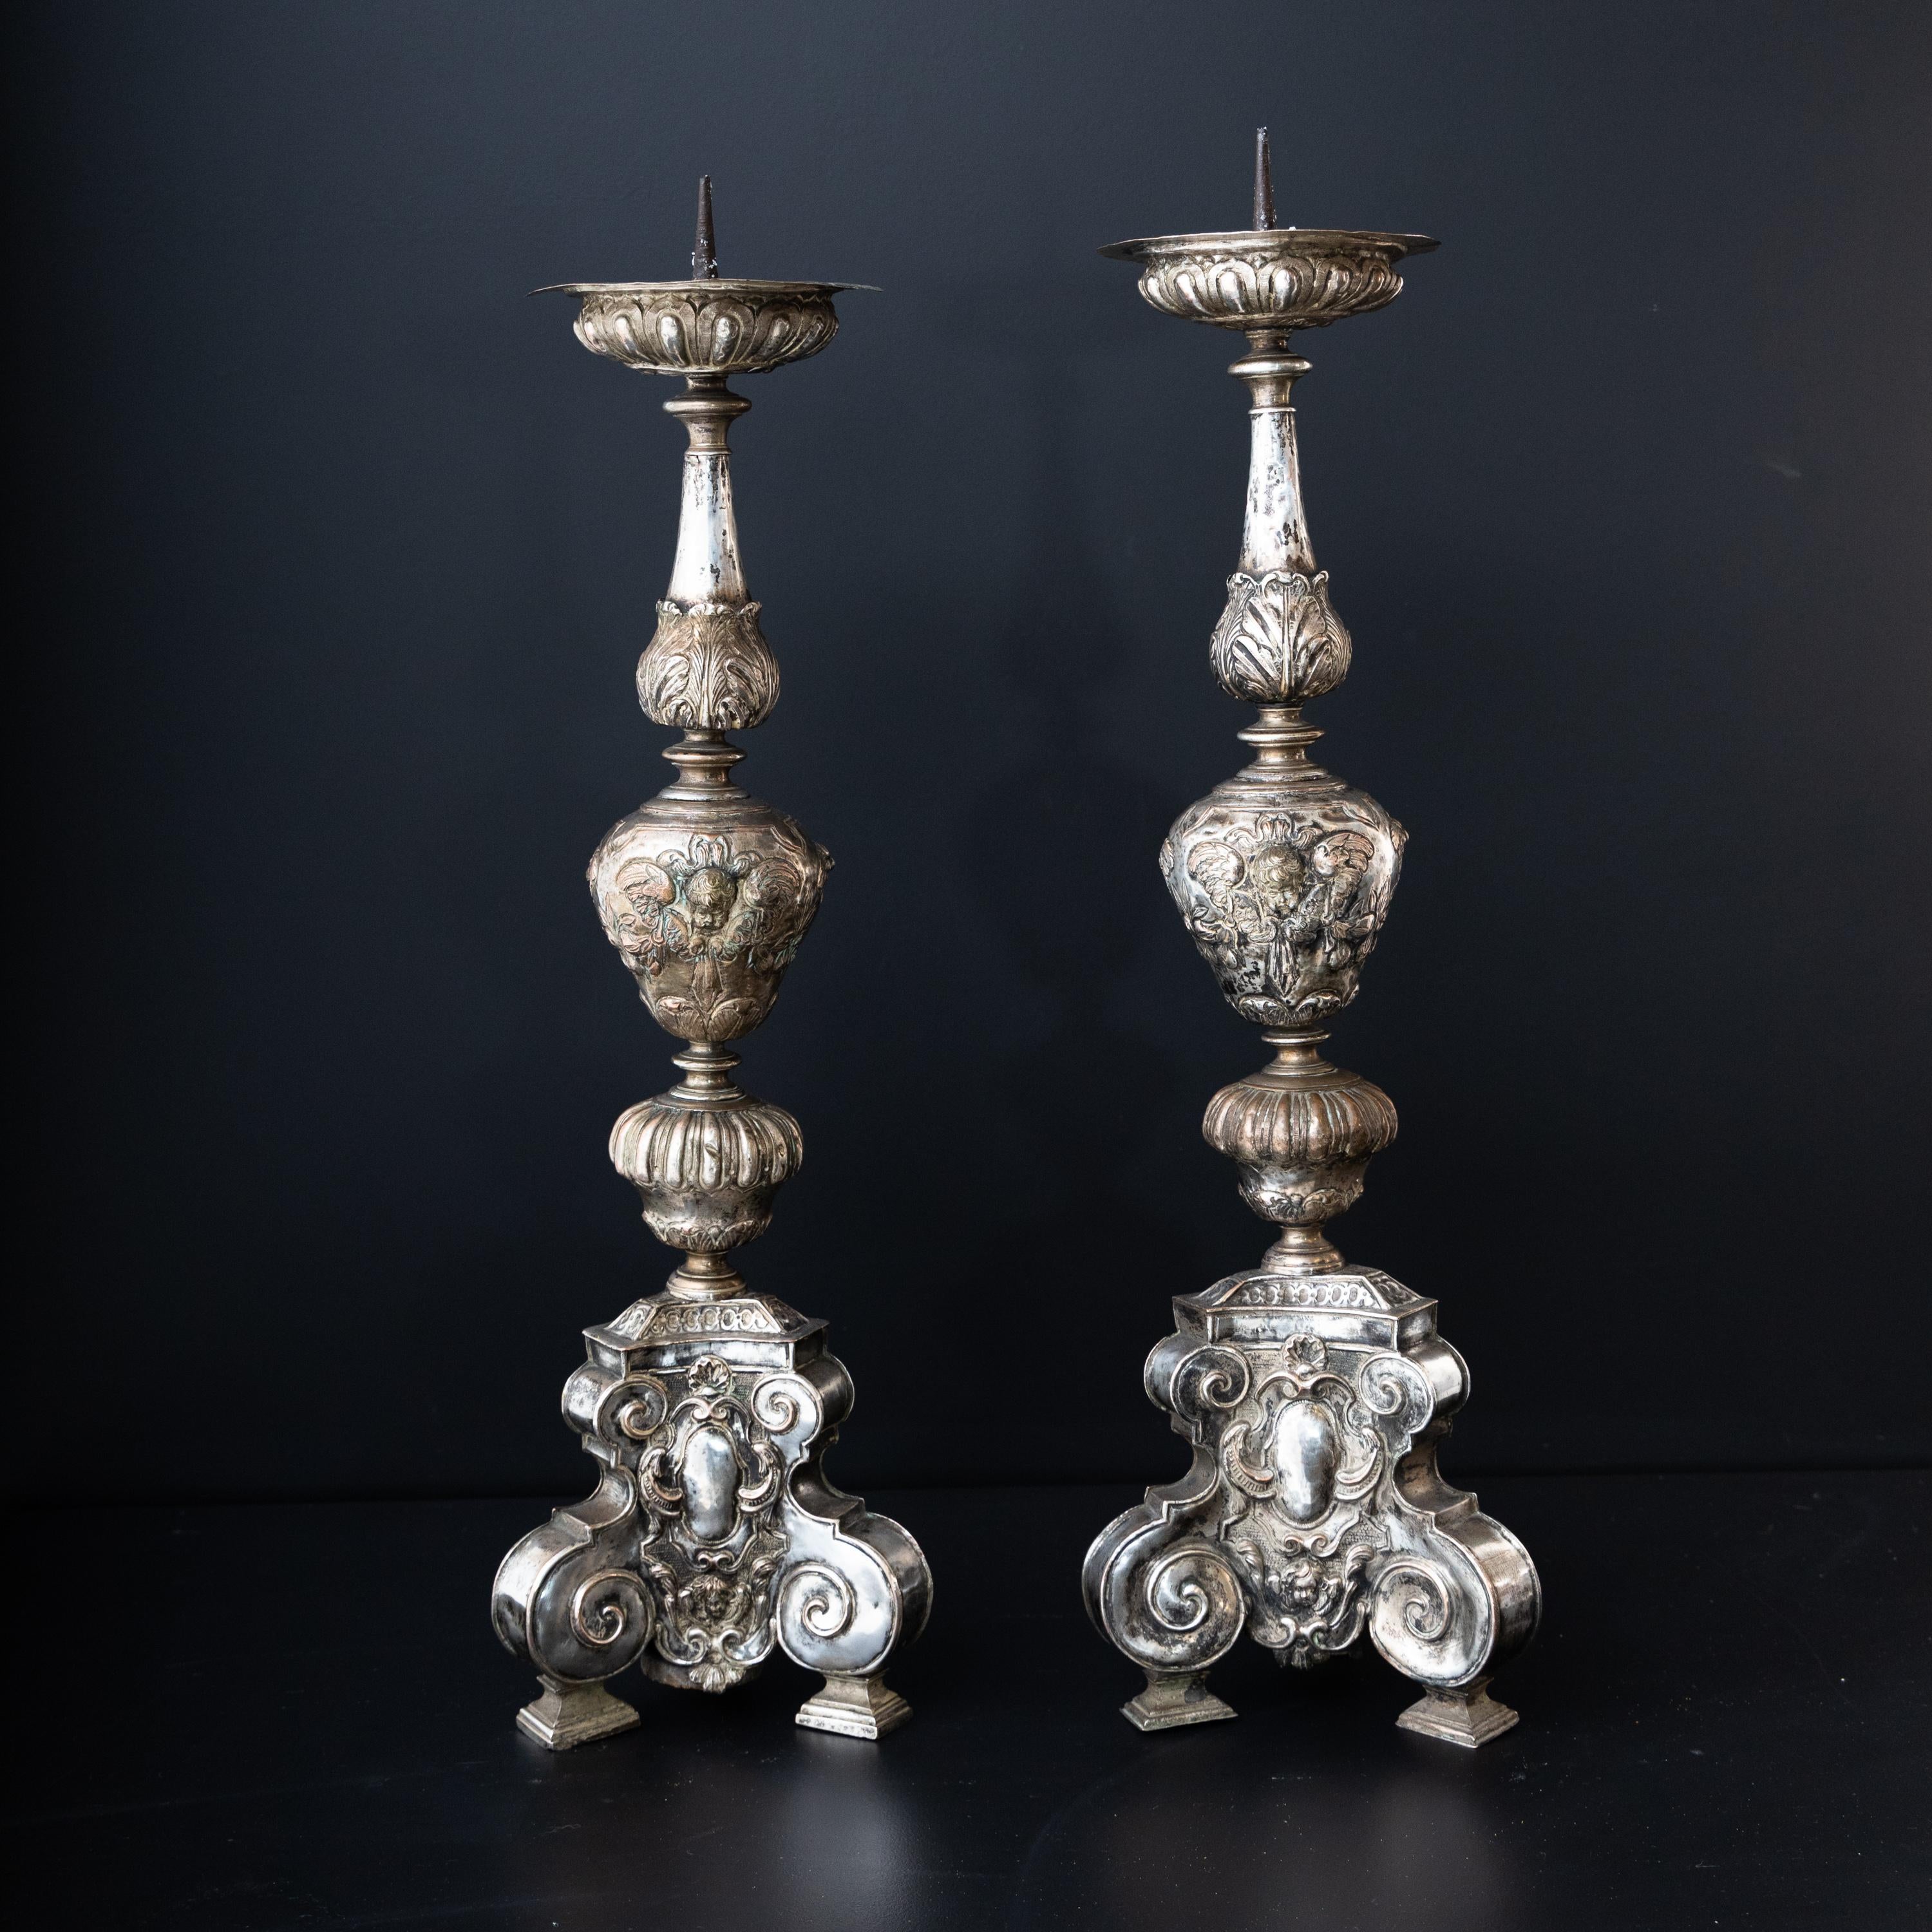 Pair of Silver-Plated Altar Candlesticks, Italy, 17th Century 4